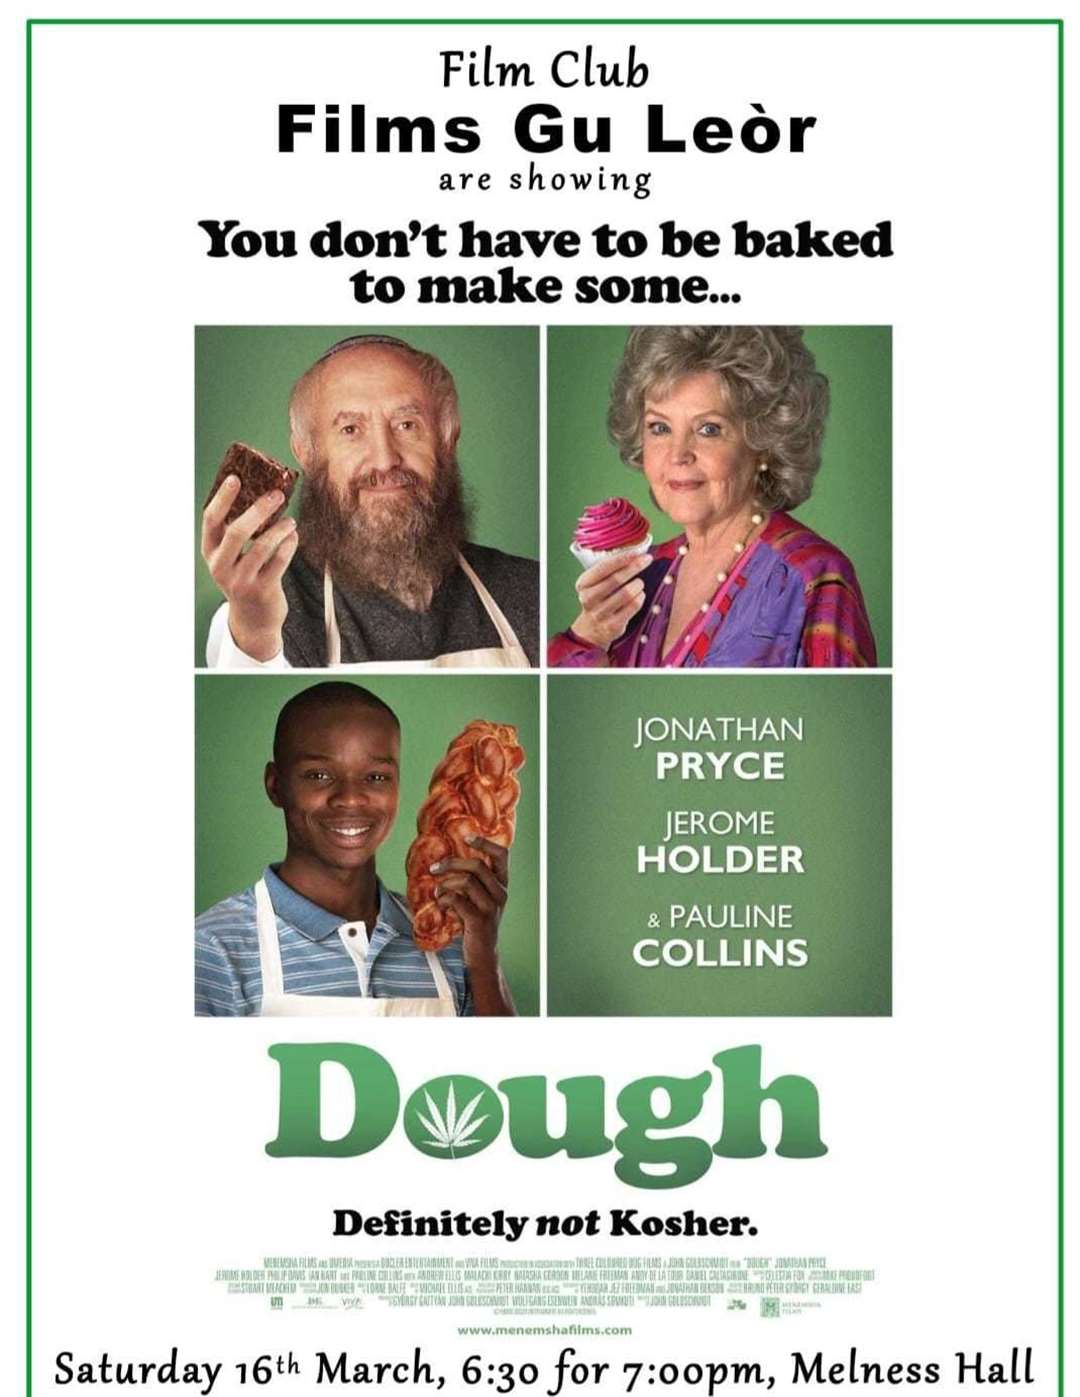 The first screening will be on March 16 at Melness Hall 6.30pm for 7pm, and the film to be shown is Dough.